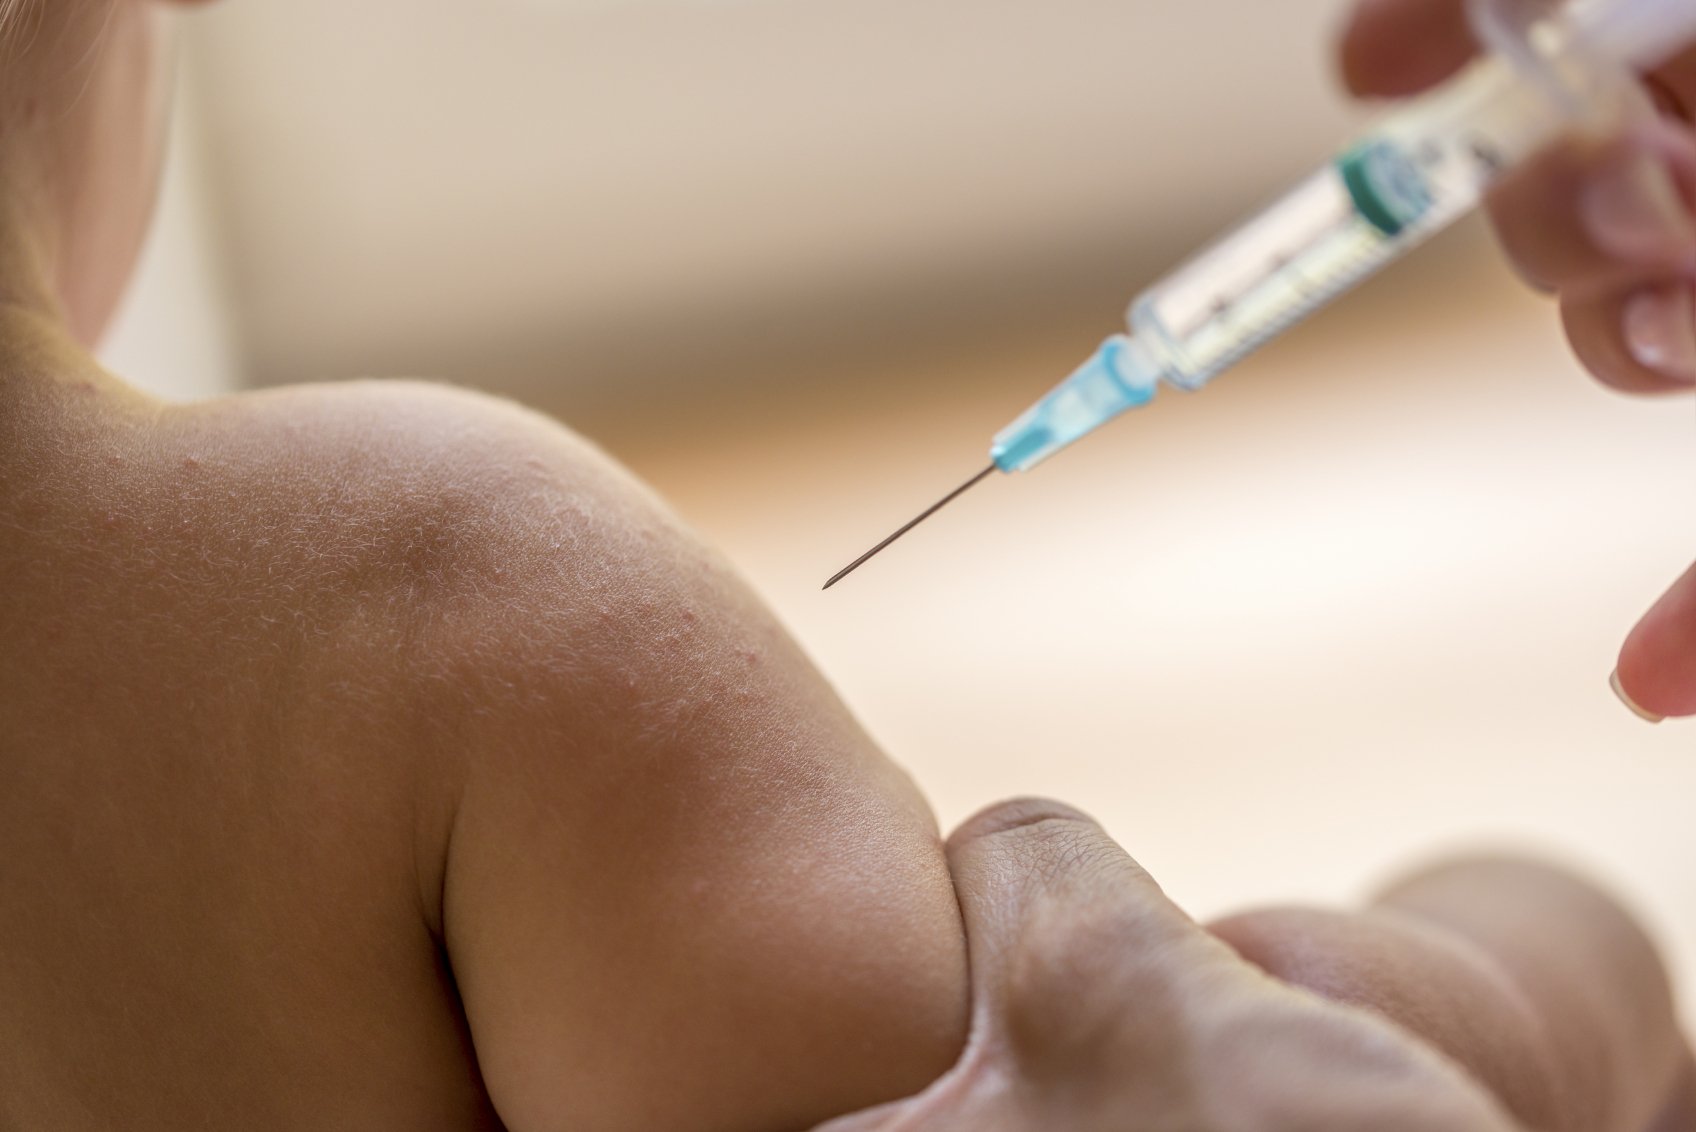 Doctor injecting a young child with a vaccination or antibiotic in a small disposable hypodermic syringe, close up of the kids arm and needle.